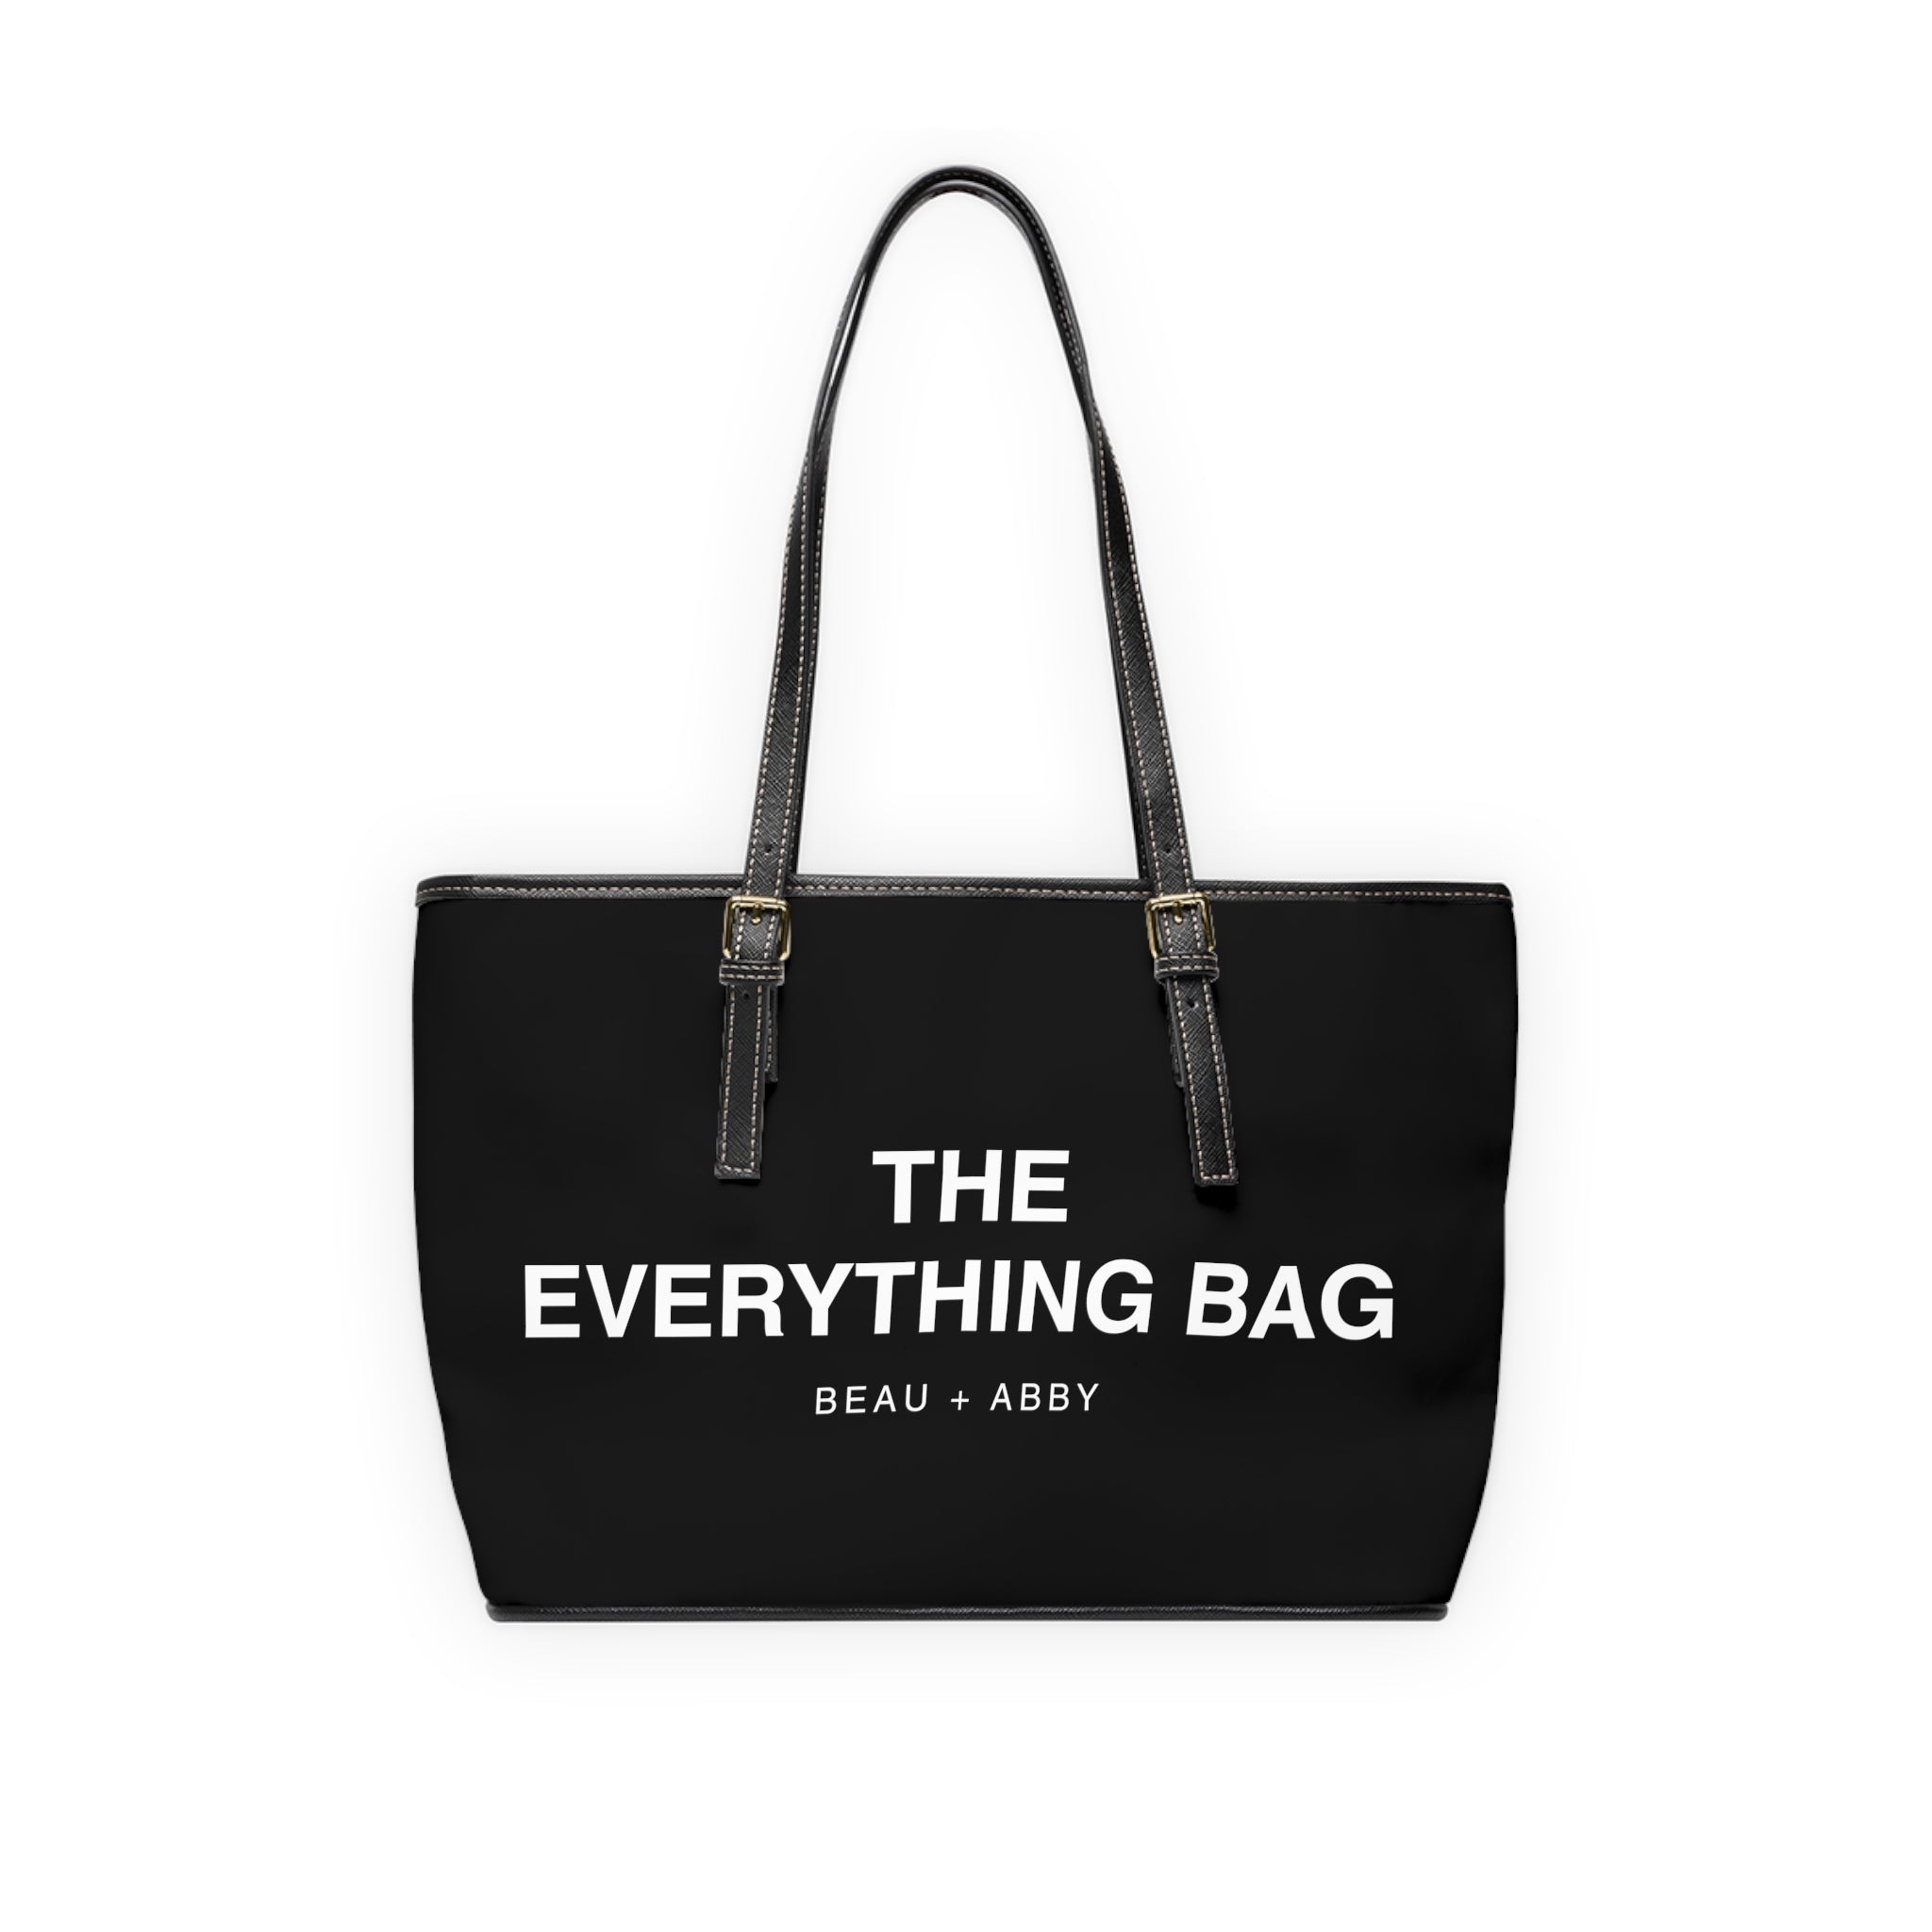 Casual Wear Accessories "Everything Bag" PU Leather Shoulder Bag in Black, Tote Bag, Weekend Tote, Gift For Her